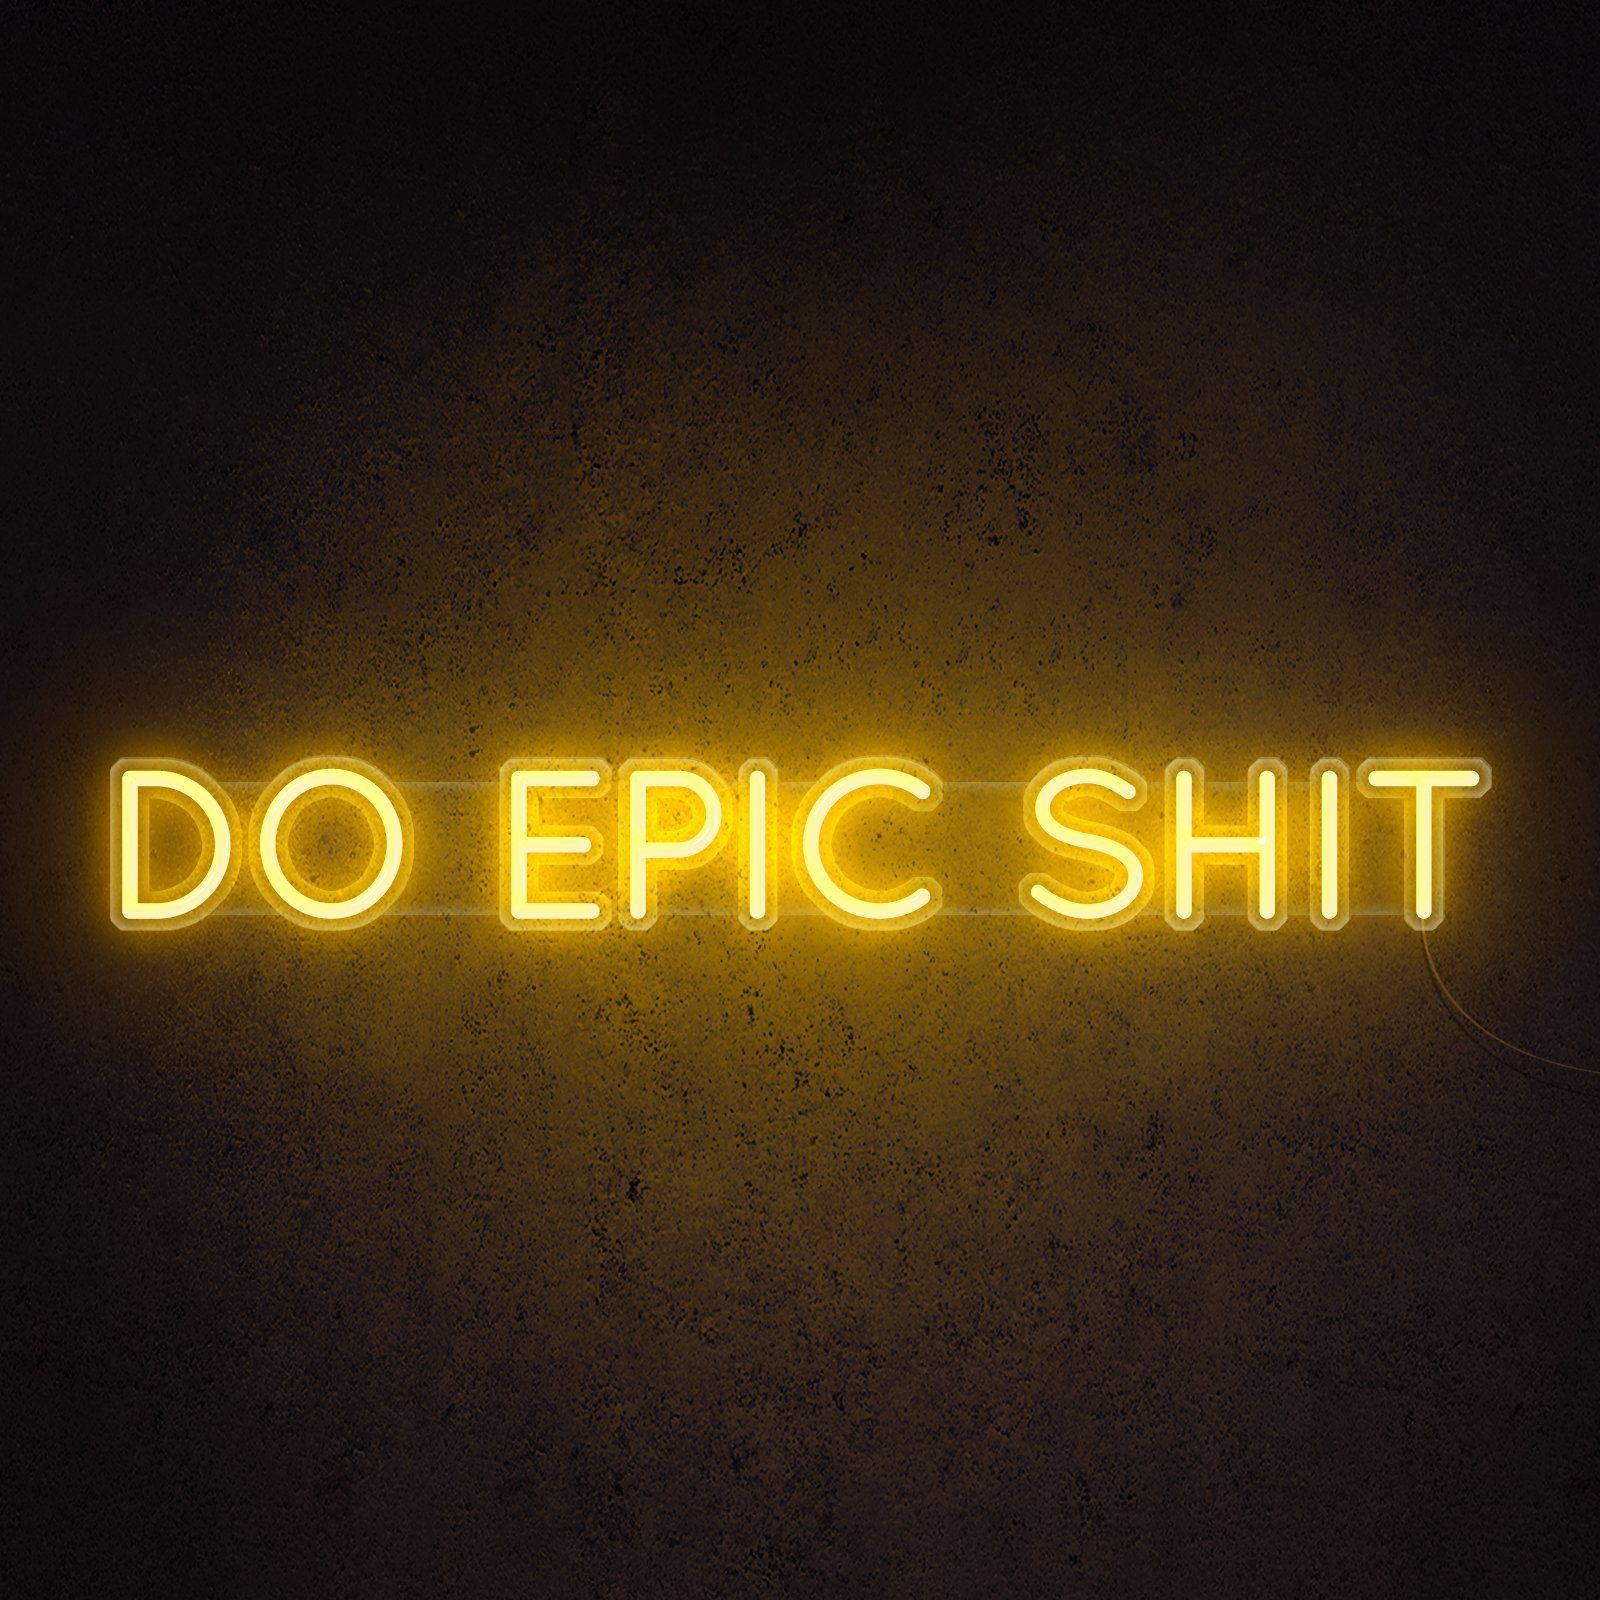 Do Epic Sh*t Neon Sign. Neon signs, Neon quotes, Yellow aesthetic